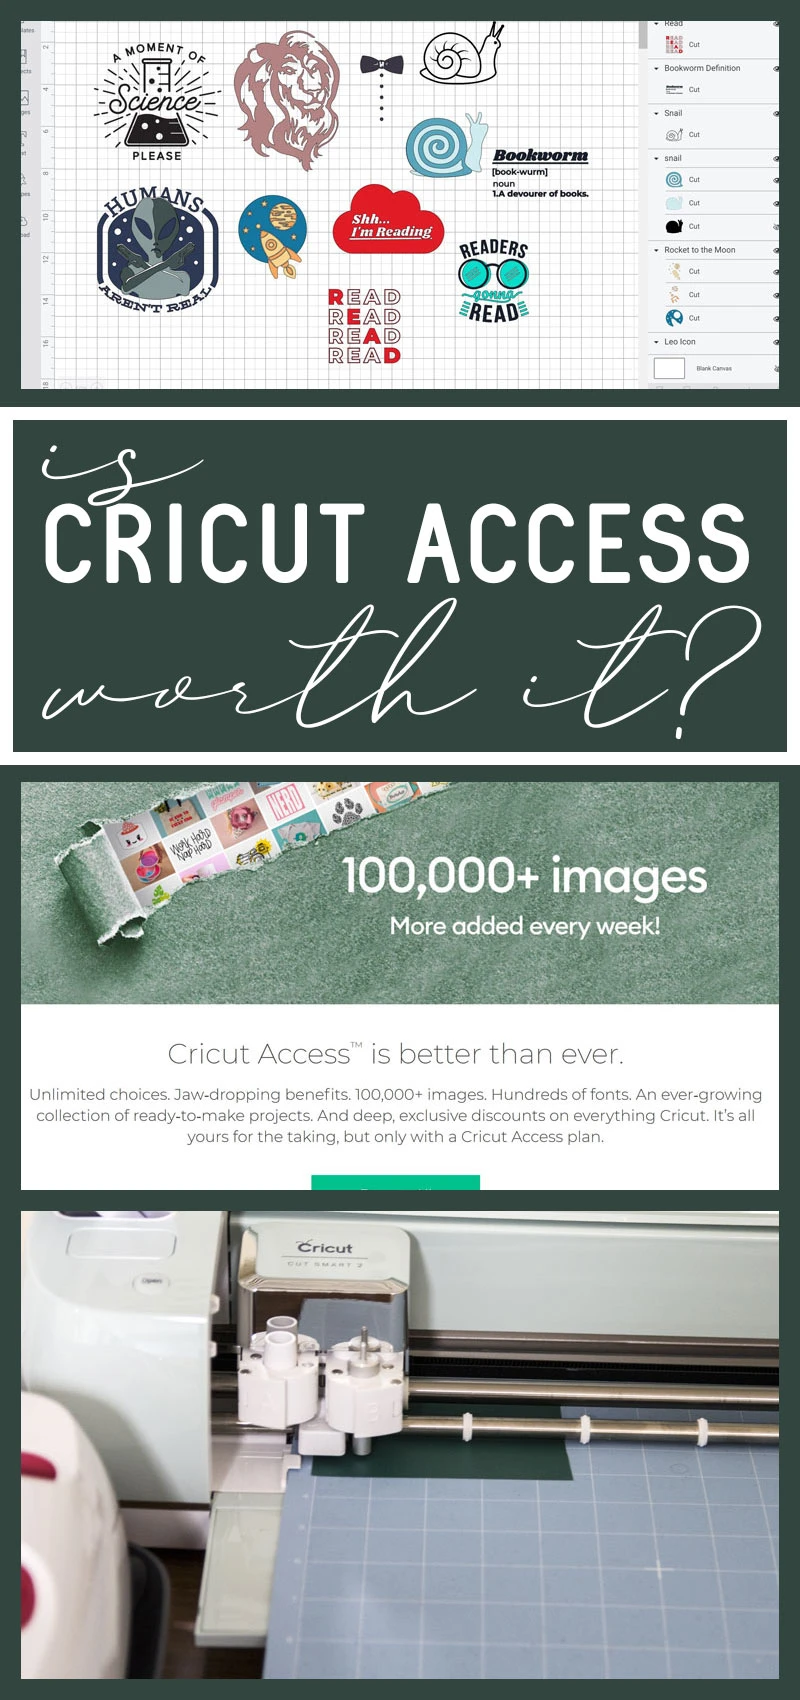 Is cricut access worth it? Title collage